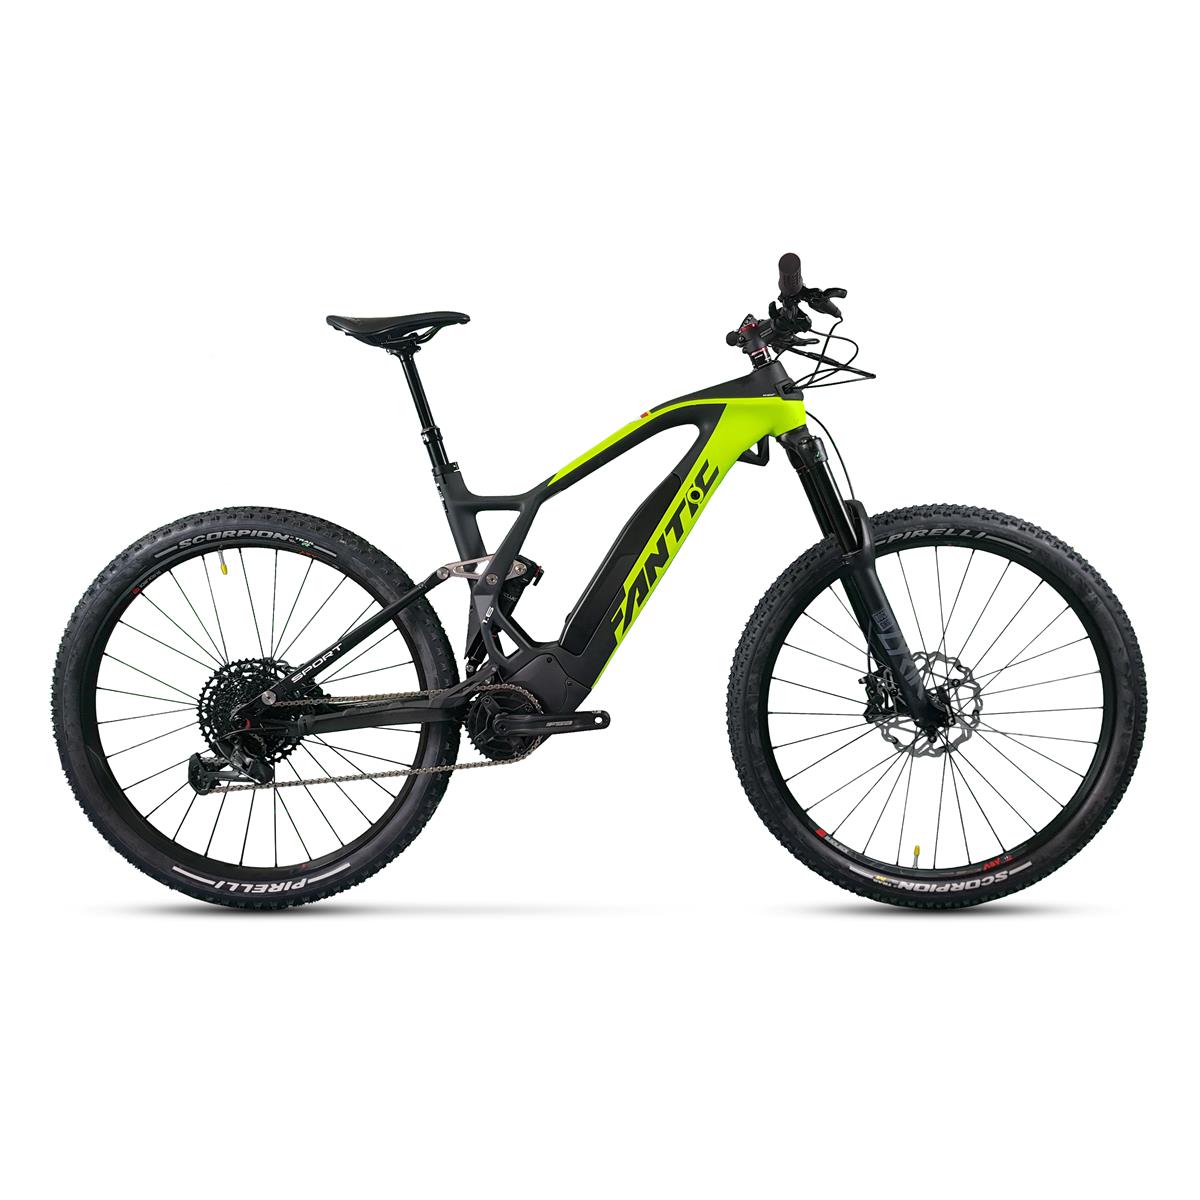 Integra XTF 1.6 Carbon Sport 29'' 160mm 12s 720wh Brose S-MAG Lima 2022 Talla S